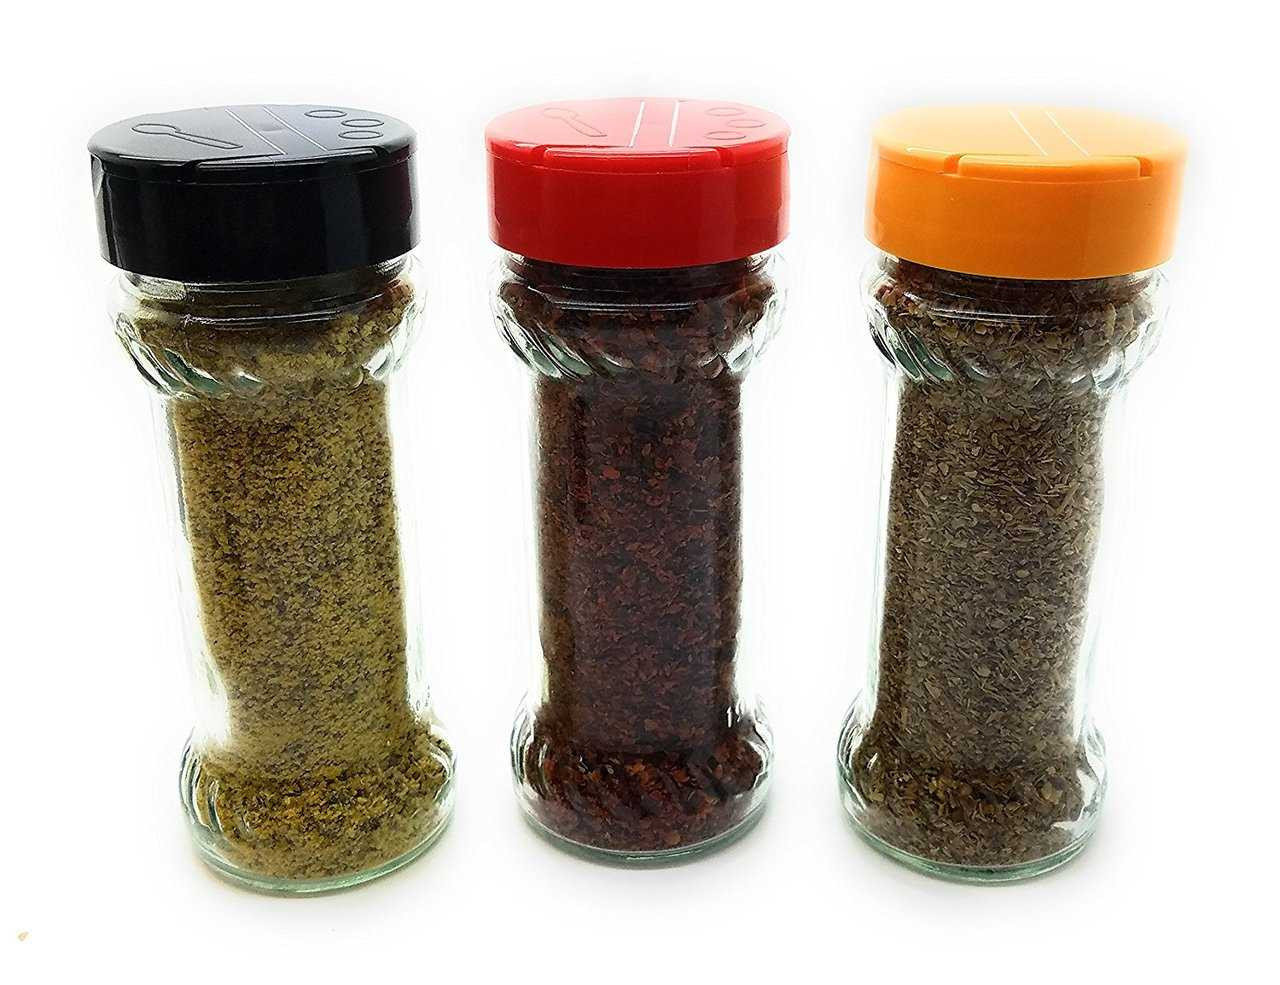 https://cdn11.bigcommerce.com/s-1ybtx/images/stencil/1280x1280/products/846/6059/Set-of-8-64-oz-Glass-Spice-Jars-with-Shaker-Fitment-and-Black-Caps_2628__18455.1674334402.jpg?c=2?imbypass=on